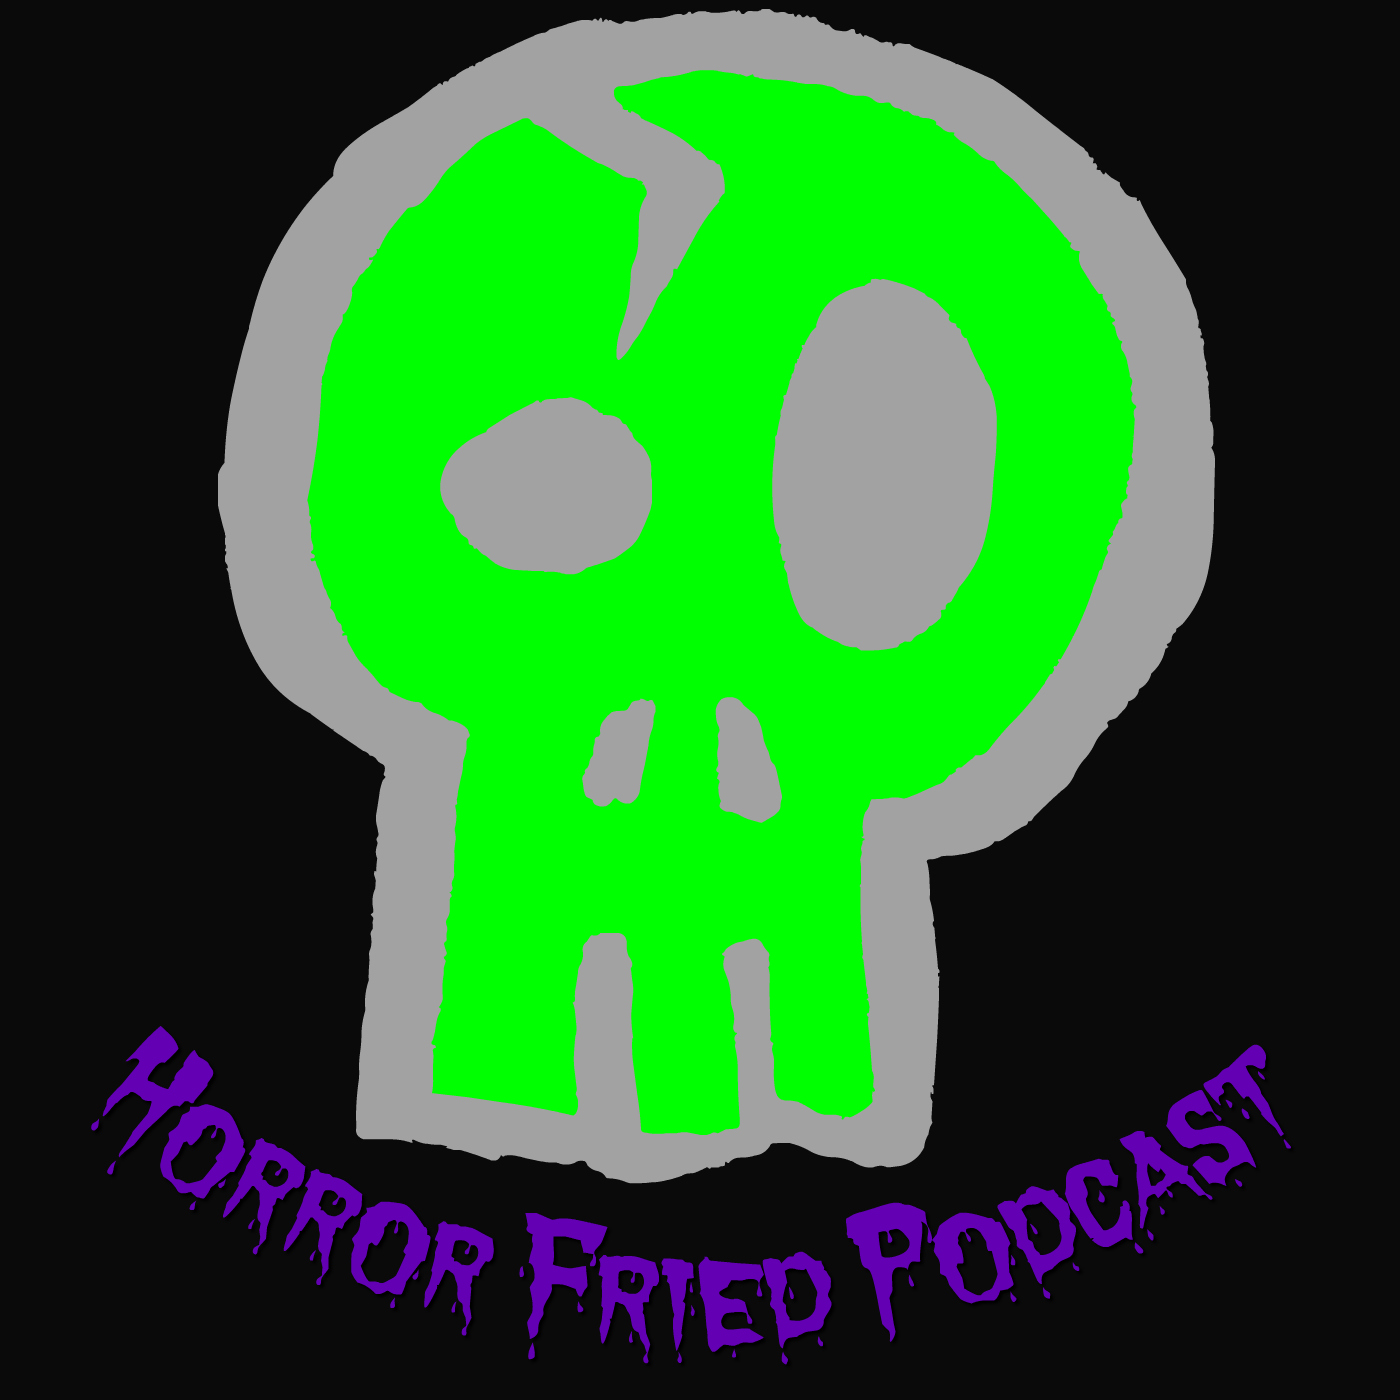 Episode 1 Brian and Chris talk Psycho